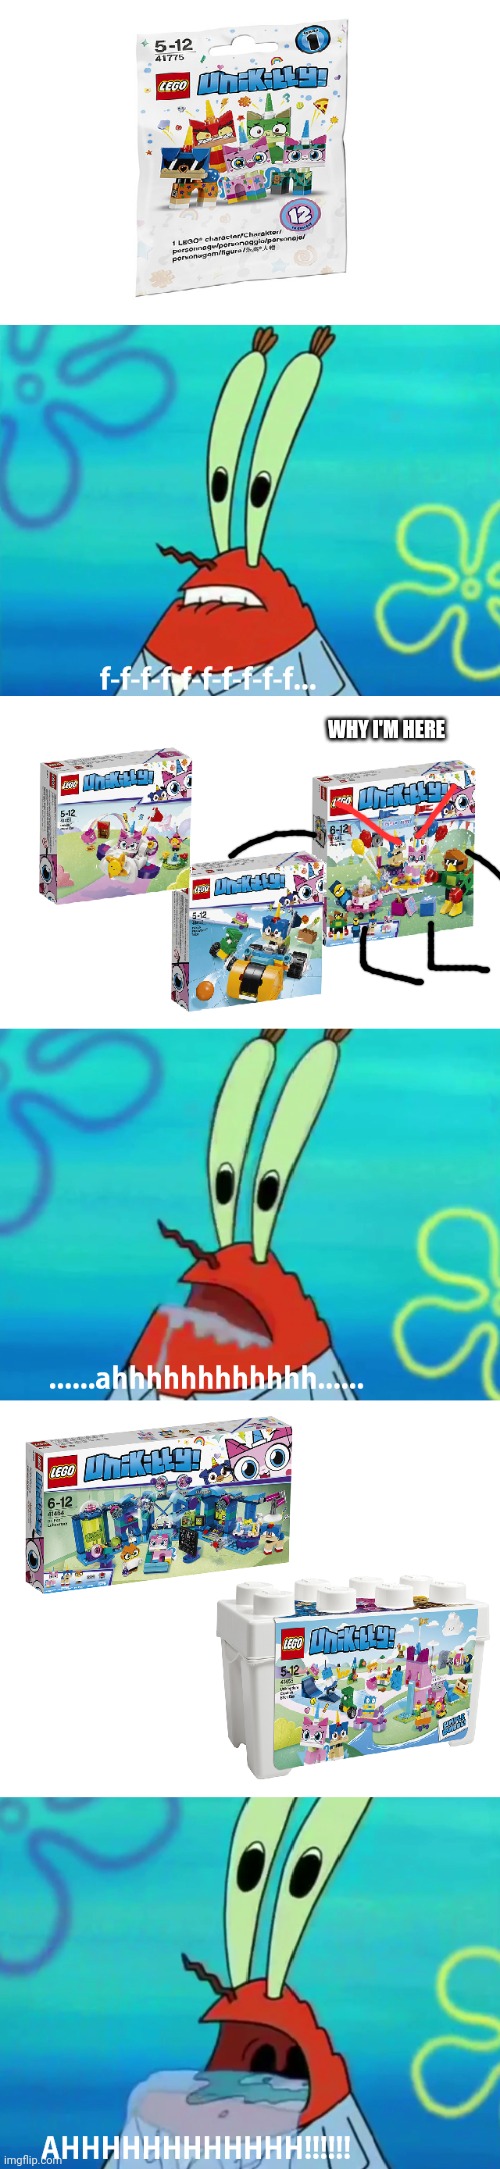 Unikitty box stucked on the Mr krabs wants unikitty stuff | WHY I'M HERE | image tagged in mr krabs,unikitty box object show,unikitty,spongebob,lego | made w/ Imgflip meme maker